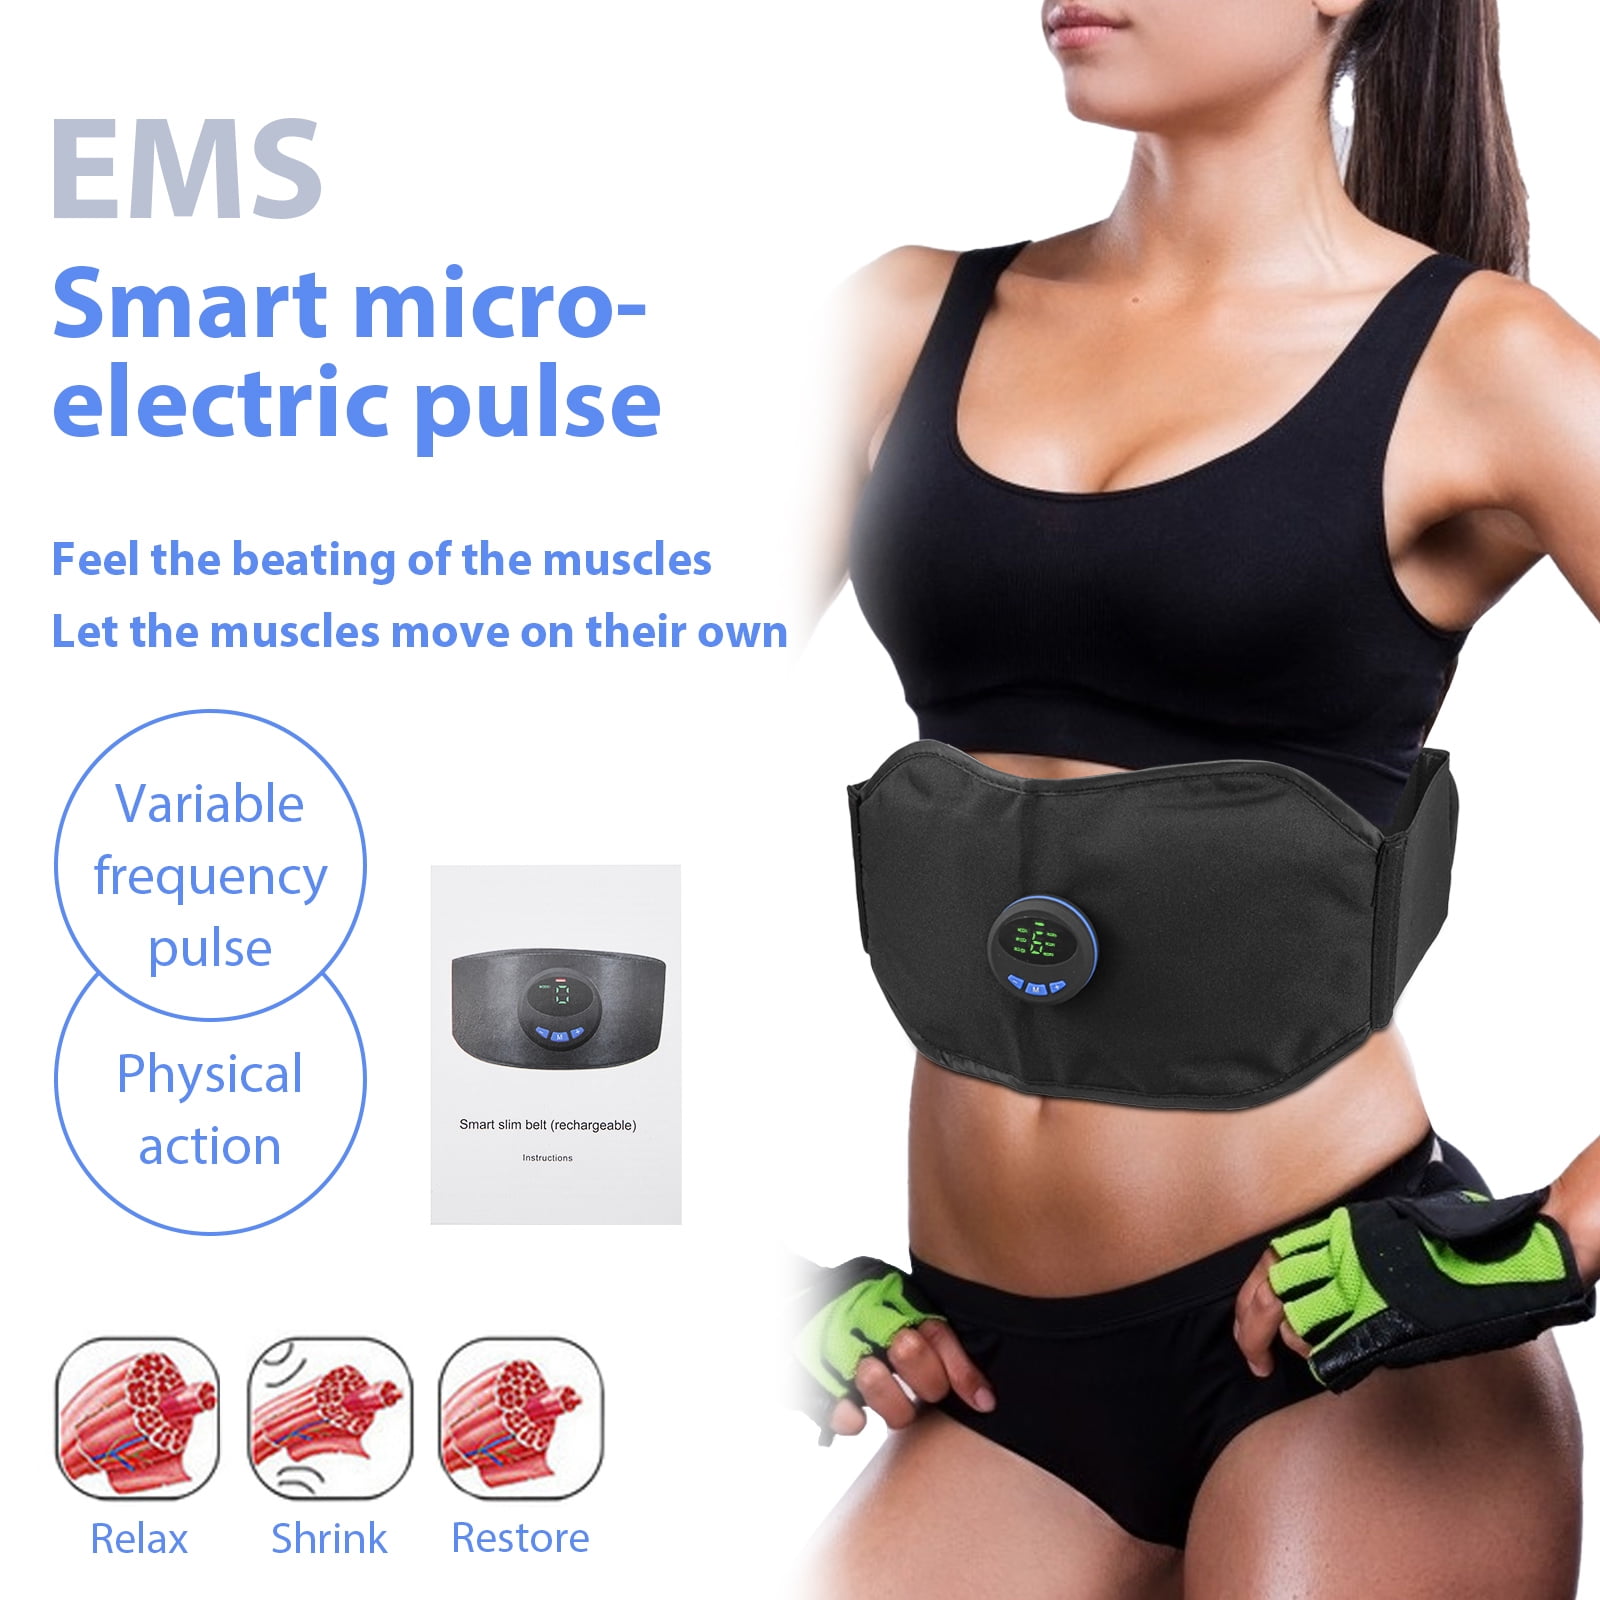 Electronic Abdominal Fitness Toning Belt Abs Trainer Abdominal Belt Abdominal Muscle Stimulator USB Rechargeable Muscles Toner for Abs Arms Legs Home Workout Fitness Training Gear Muscle Stimulator To 